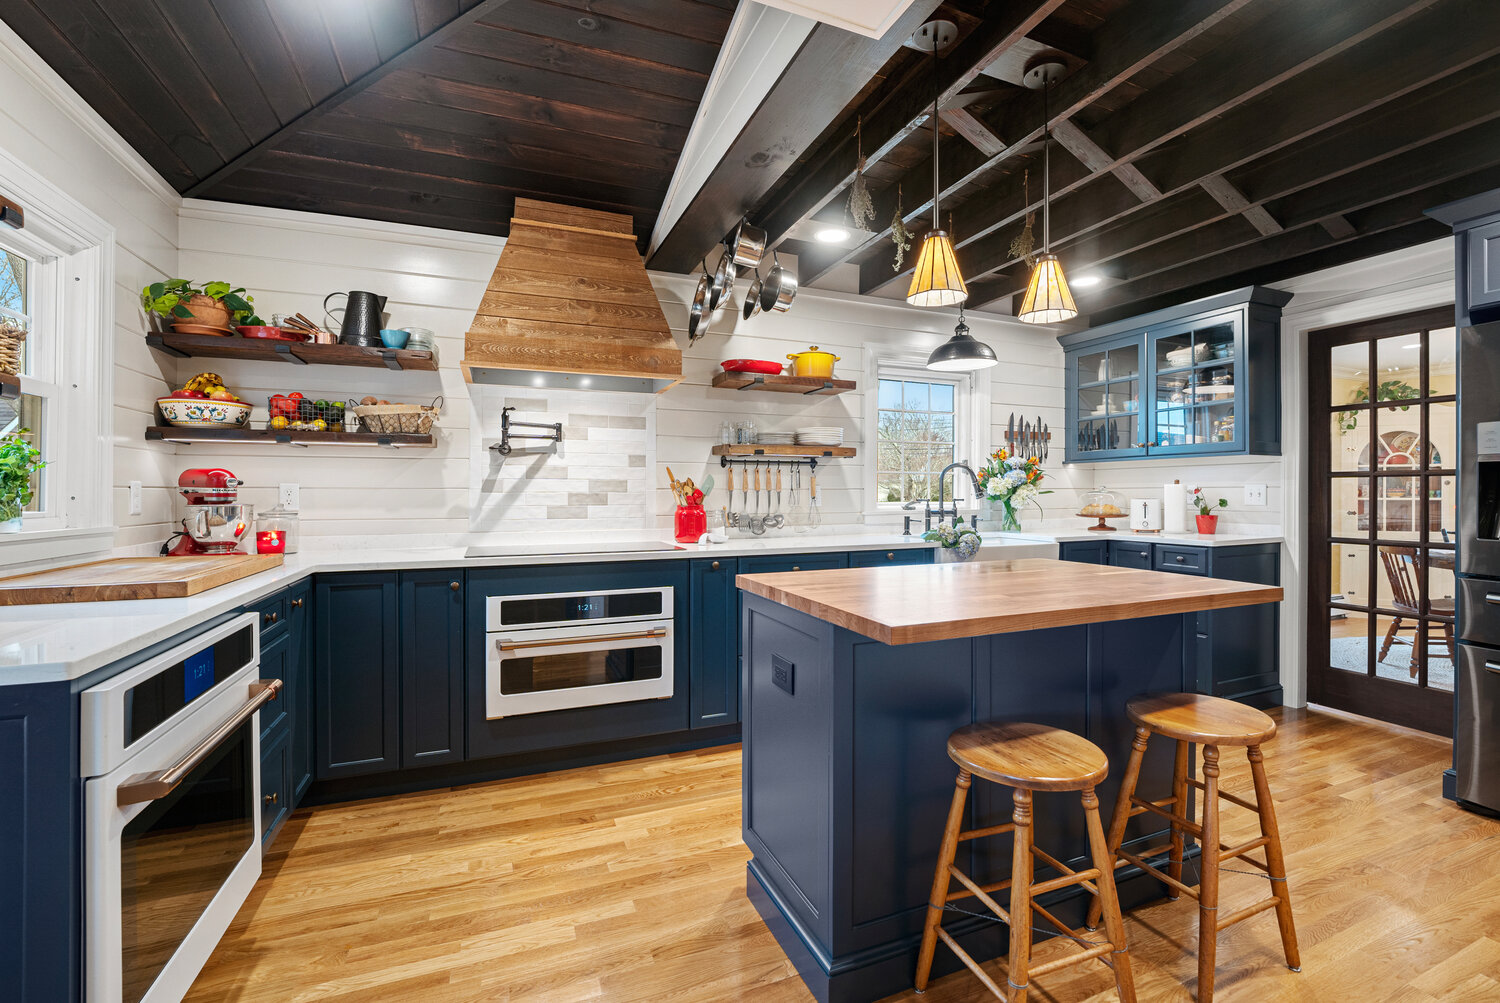 Refinished original beams create nooks to hang drying herbs and cookware